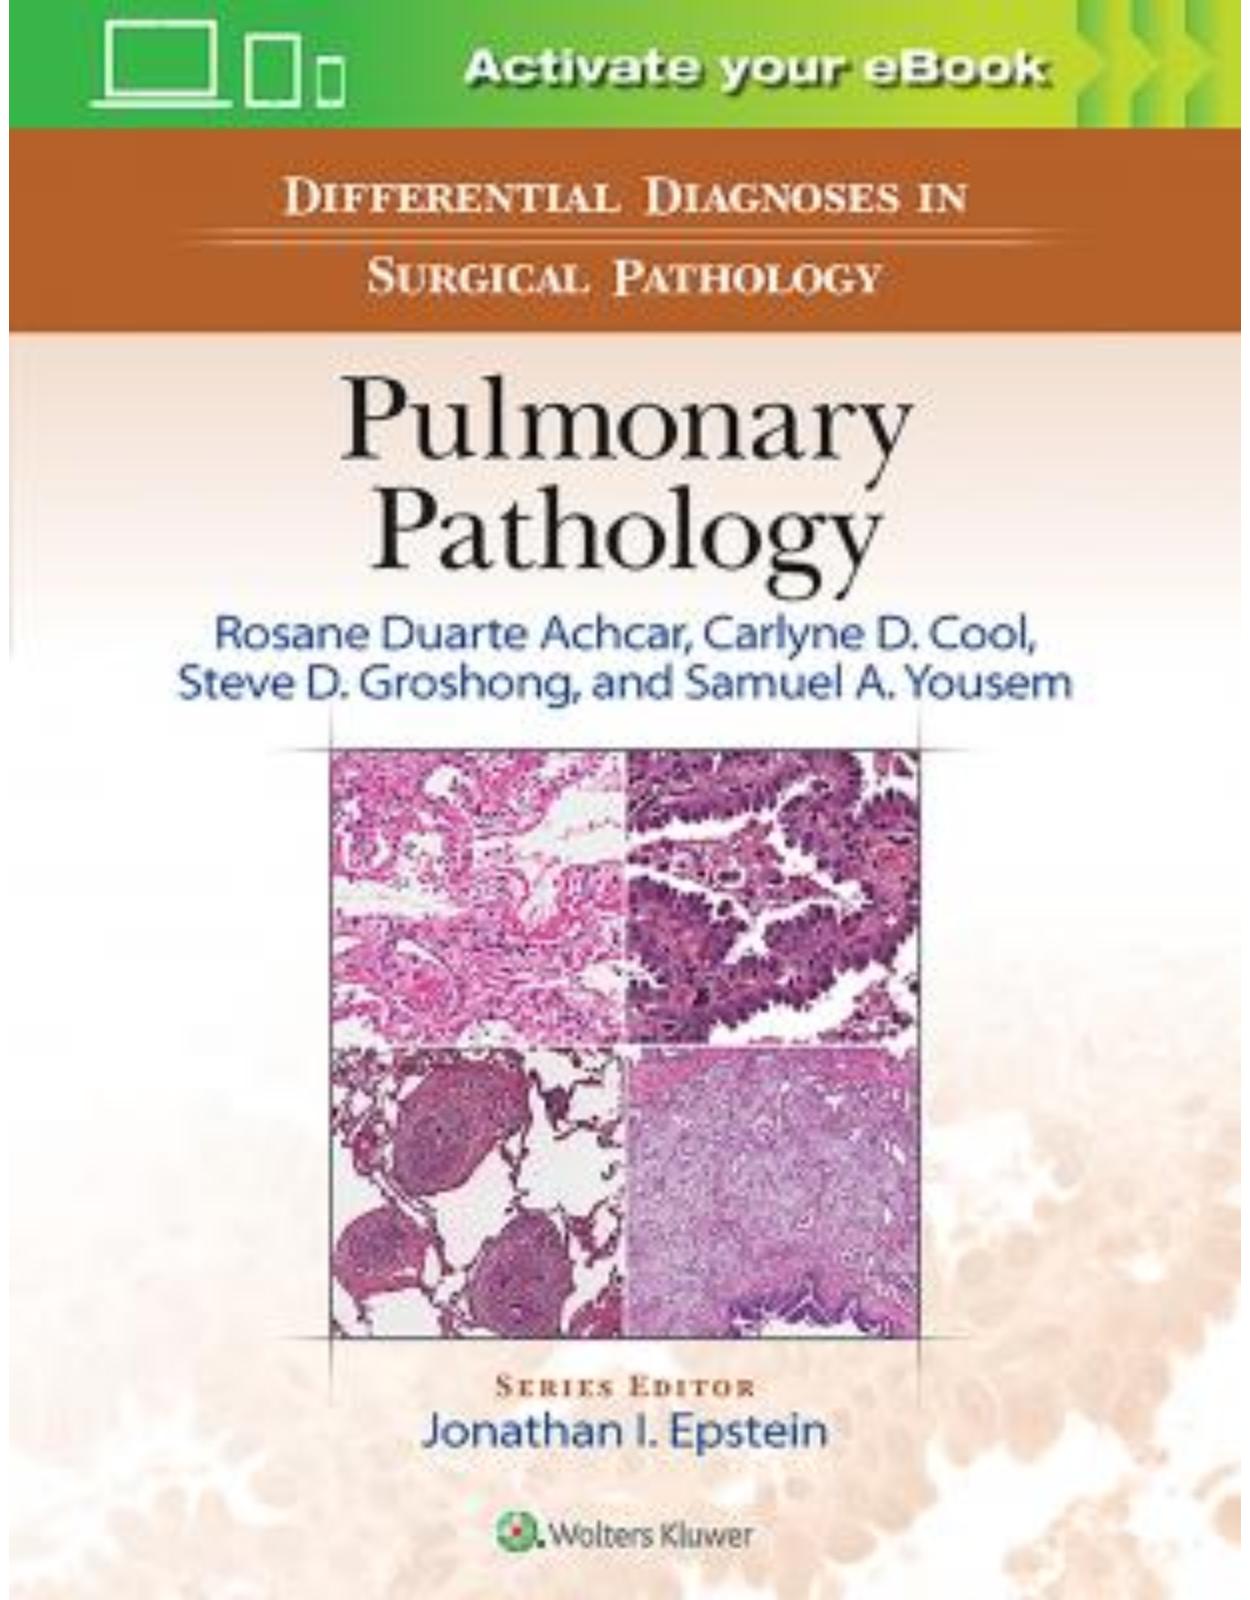 Differential Diagnosis in Surgical Pathology: Pulmonary Pathology 